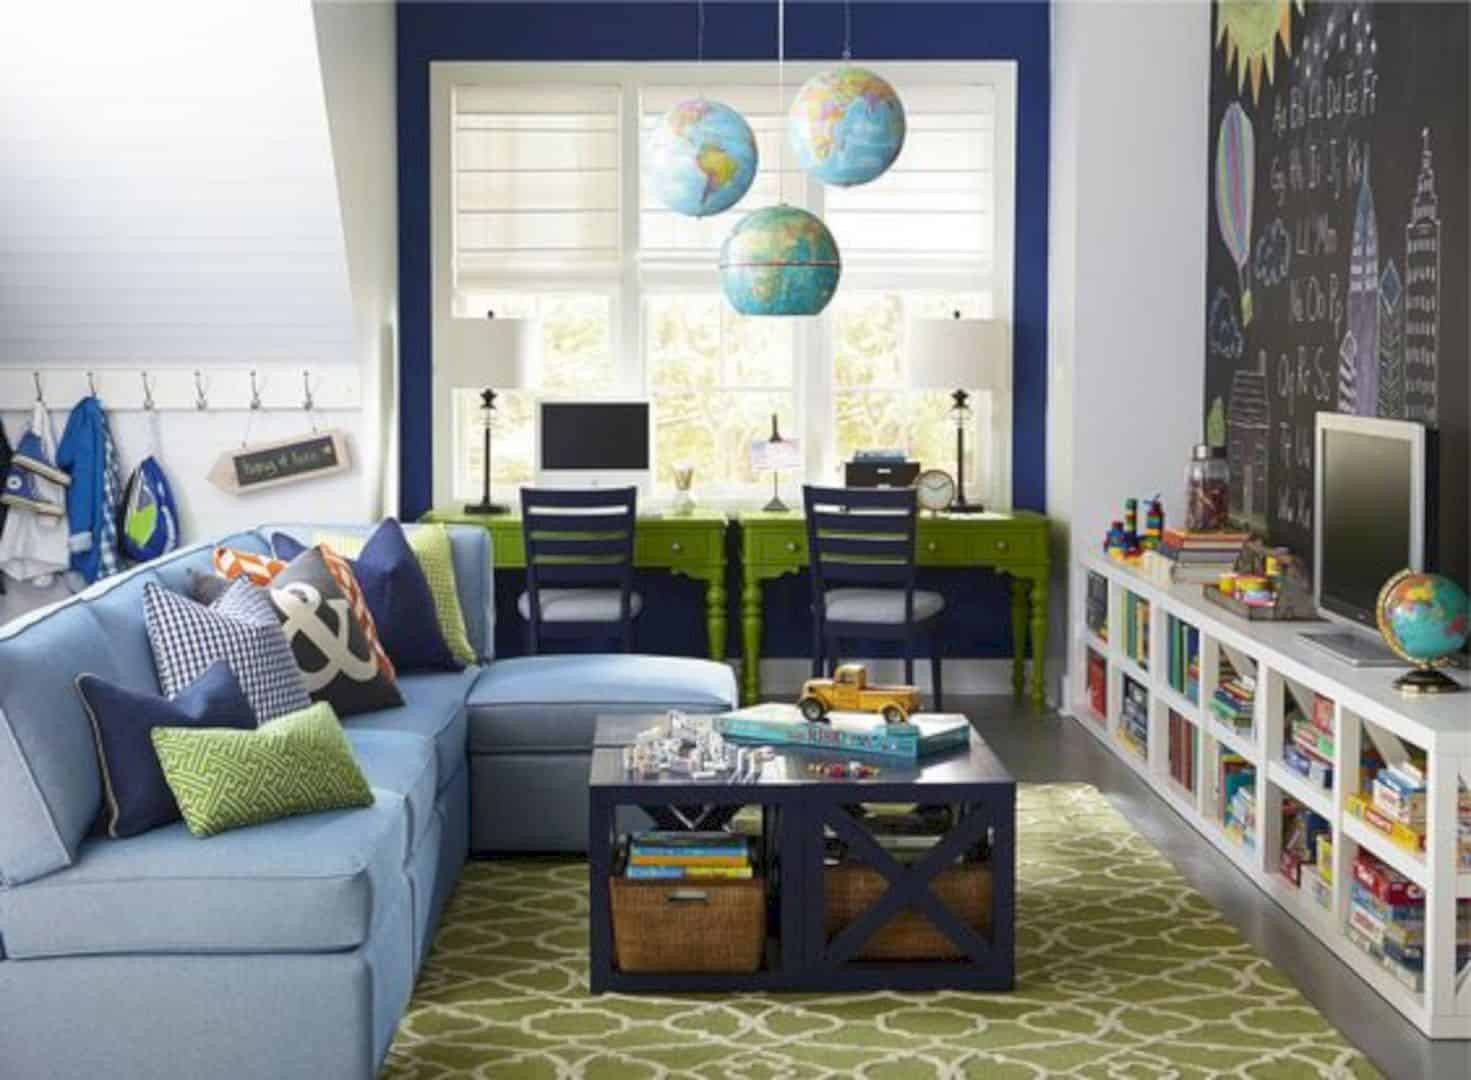 Kids Tv Room
 16 Furniture Ideas to Warm Up Your Family Room